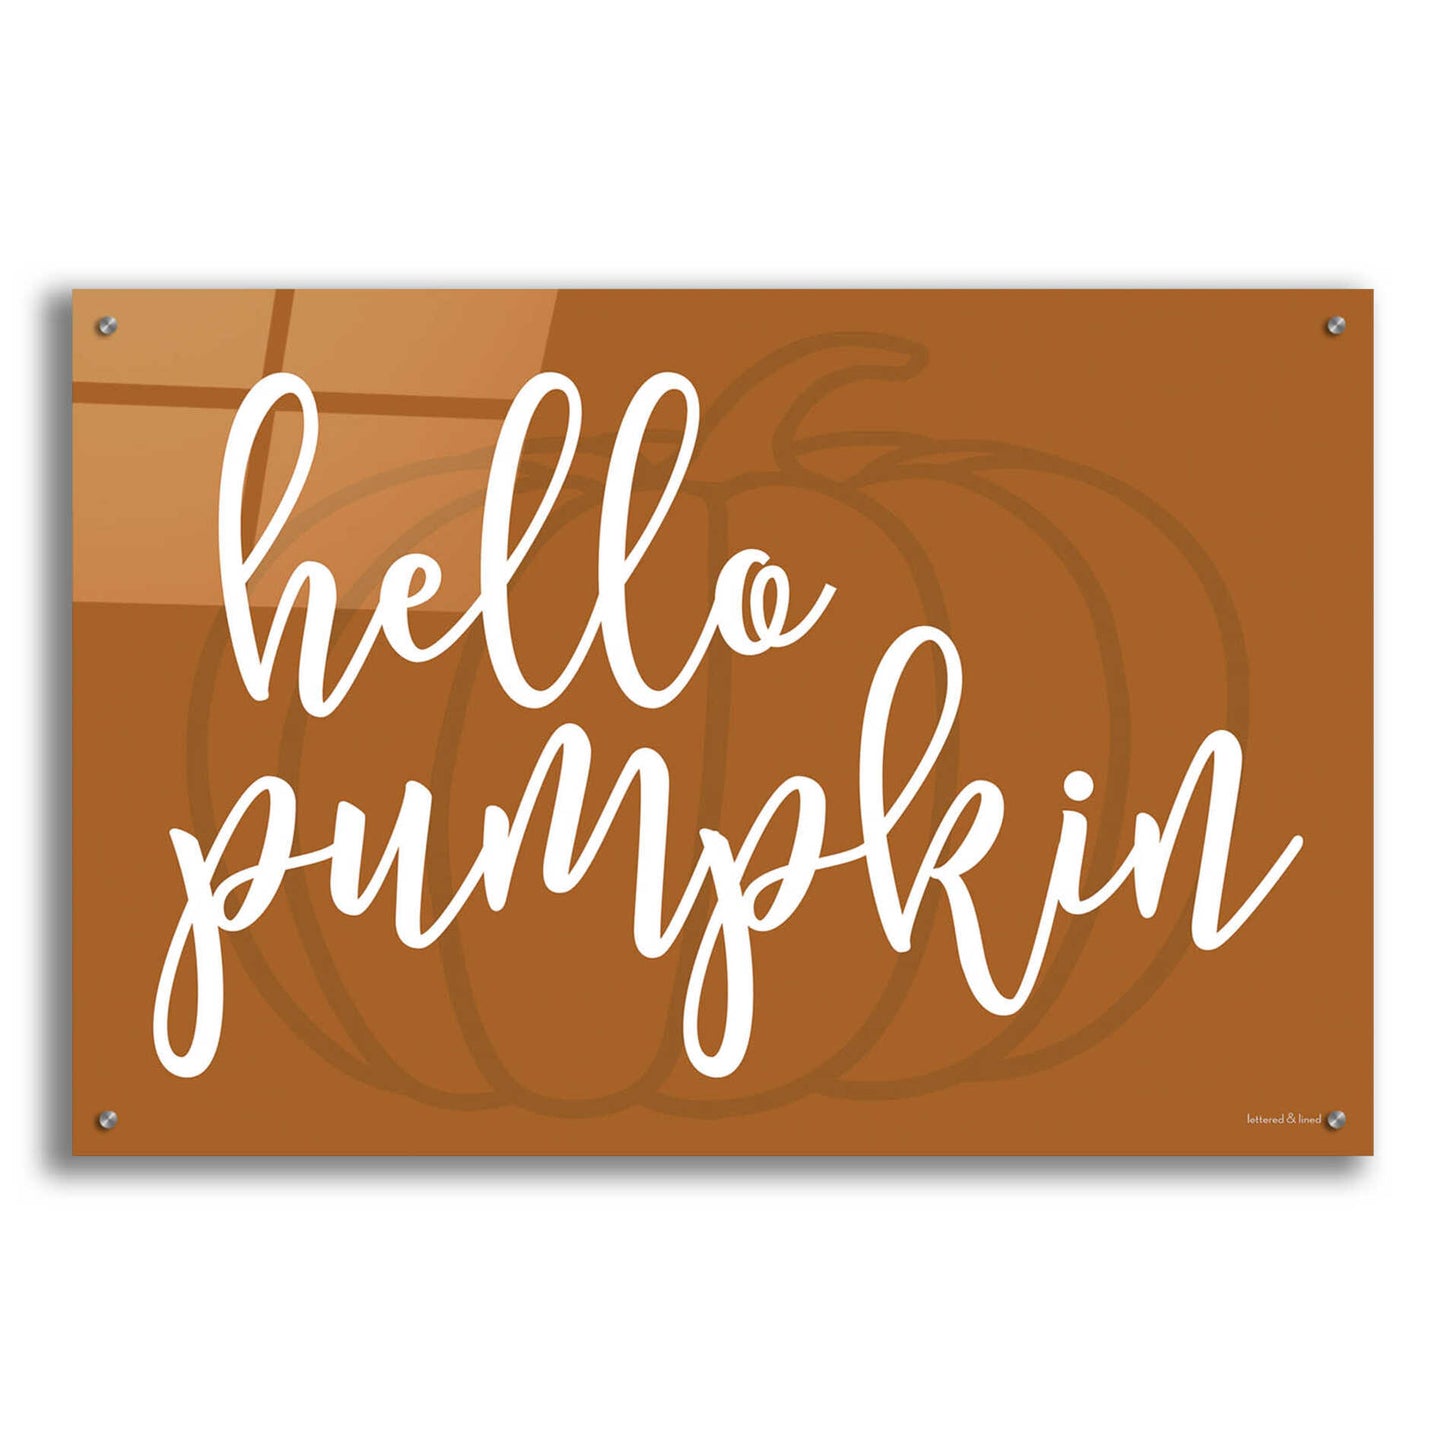 Epic Art 'Hello Pumpkin' by Lettered & Lined, Acrylic Glass Wall Art,36x24